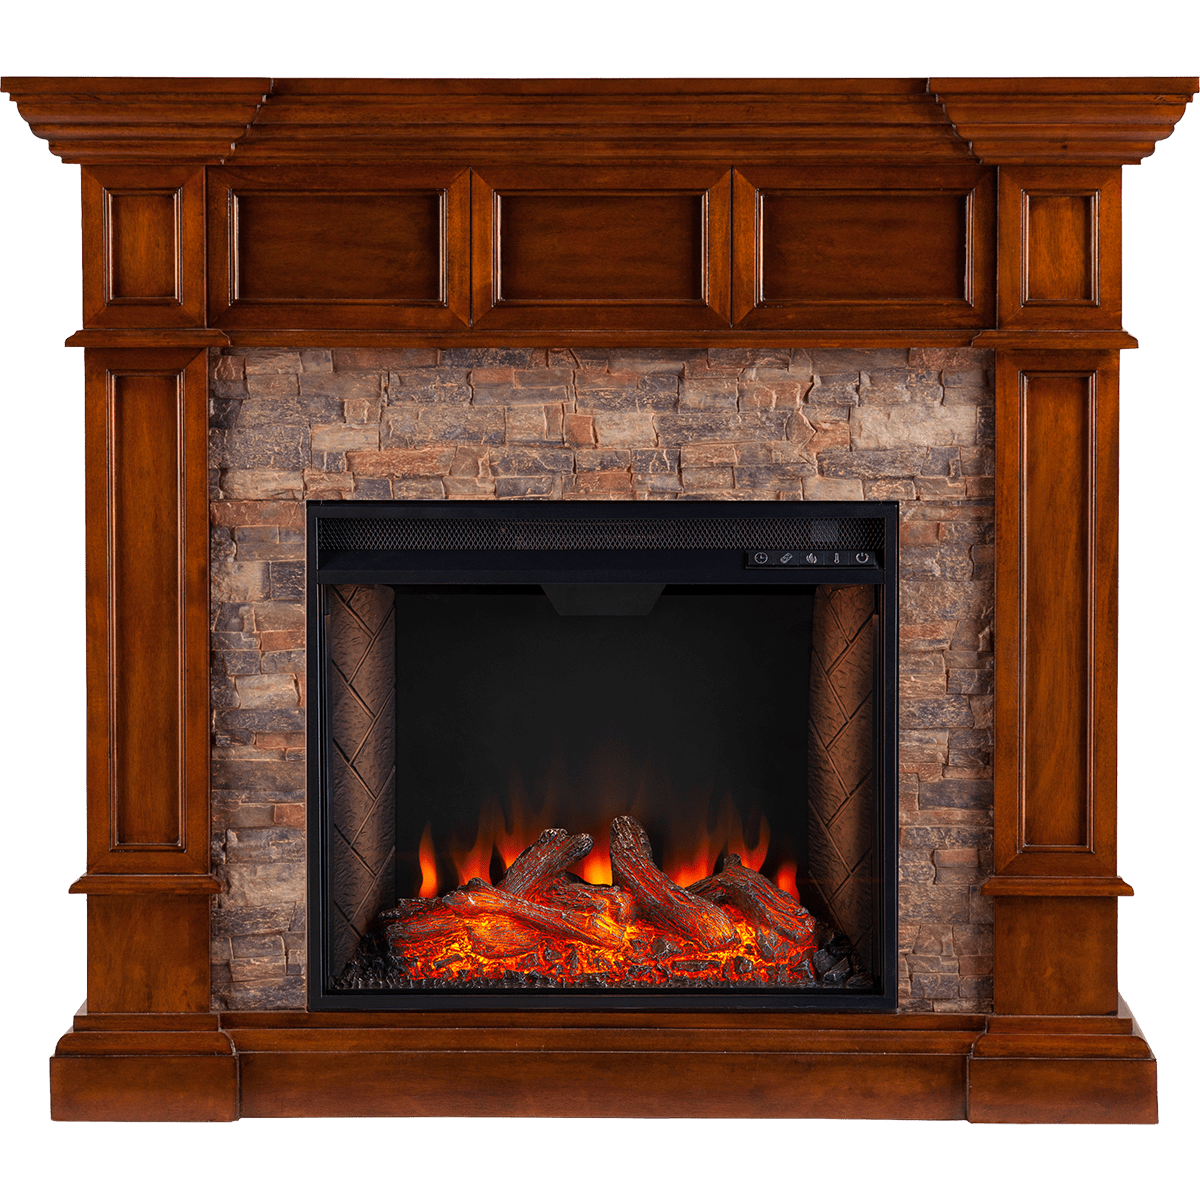 How to Install A Fireplace Mantel Shelf Beautiful southern Enterprises Merrimack Simulated Stone Convertible Electric Fireplace